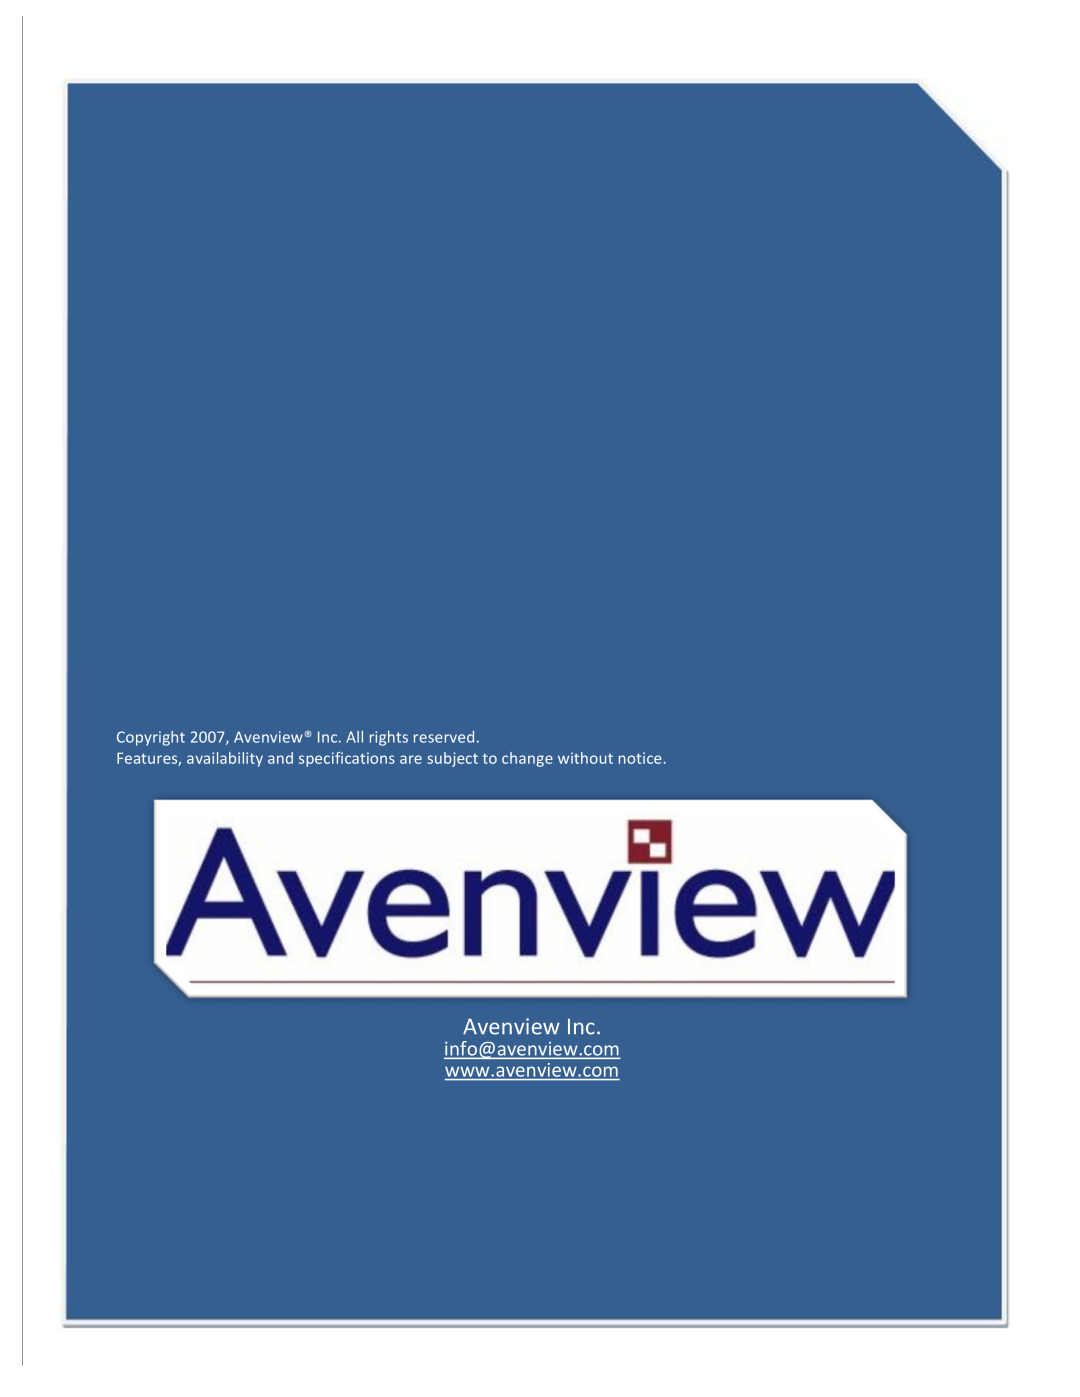 Avenview KVM-C5 Series manual info@avenview.com, Copyright 2007, Avenview Inc. All rights reserved 